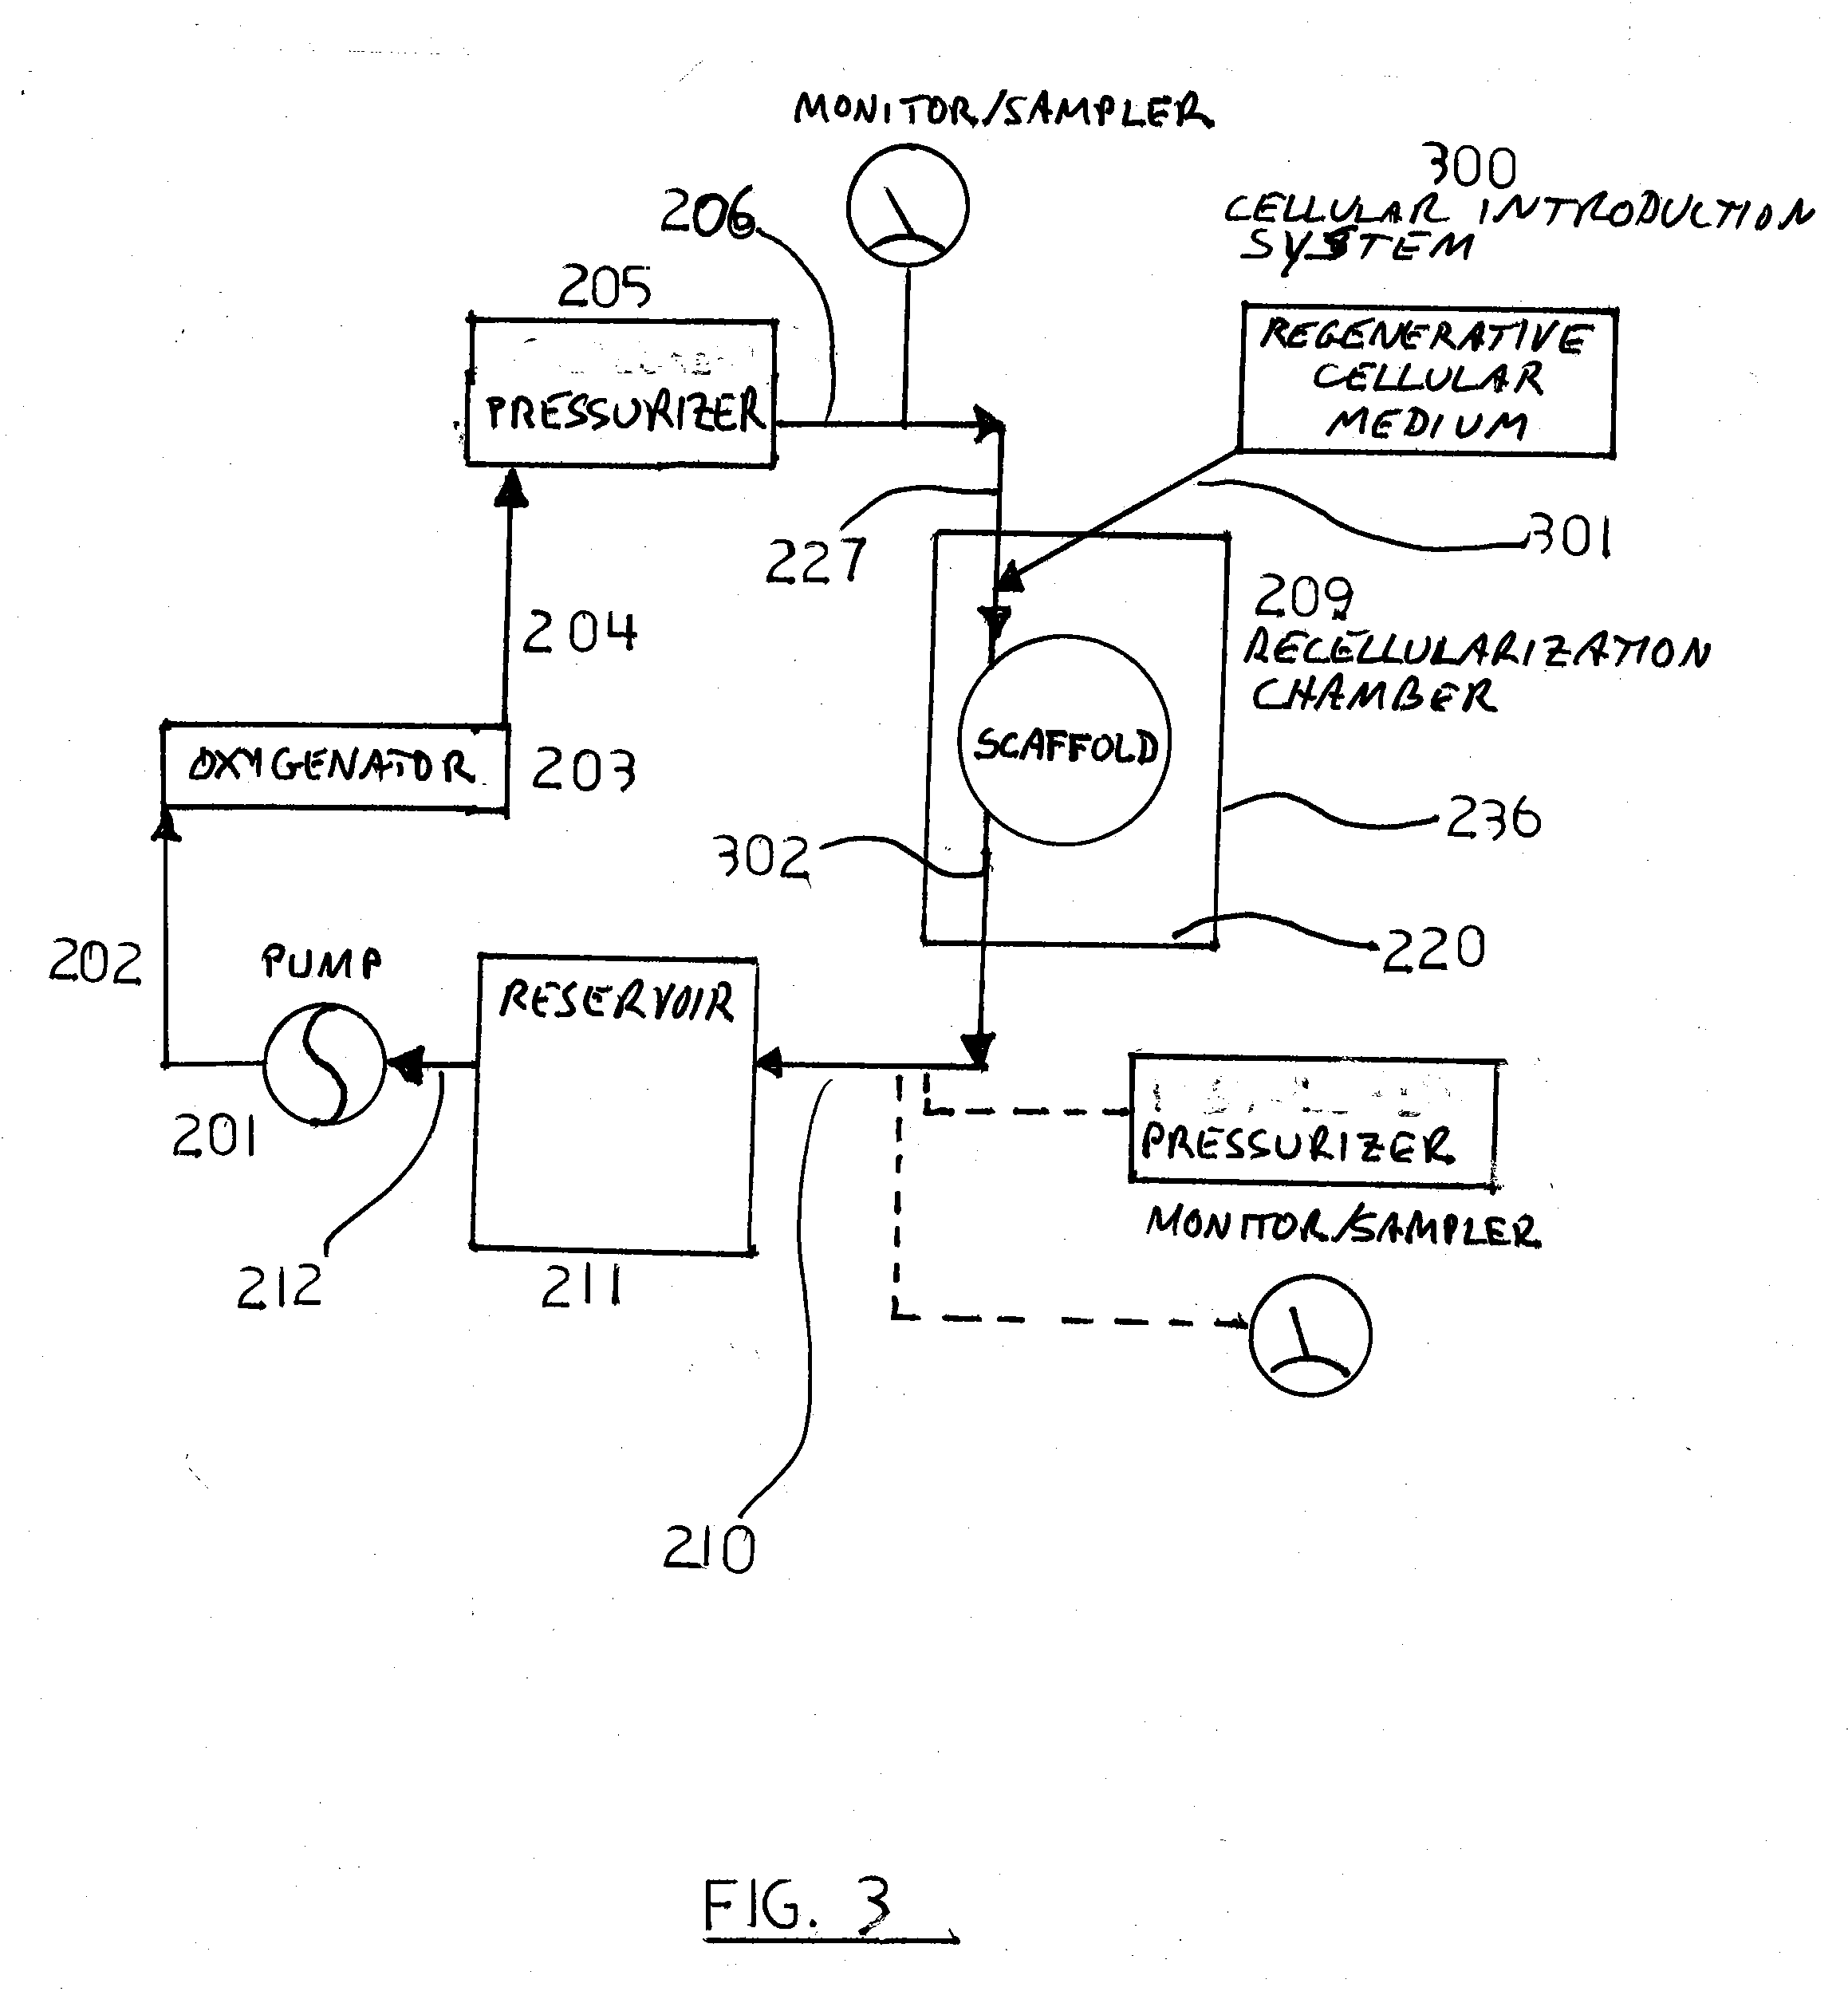 Decellularization and recellularization apparatuses and systems containing the same